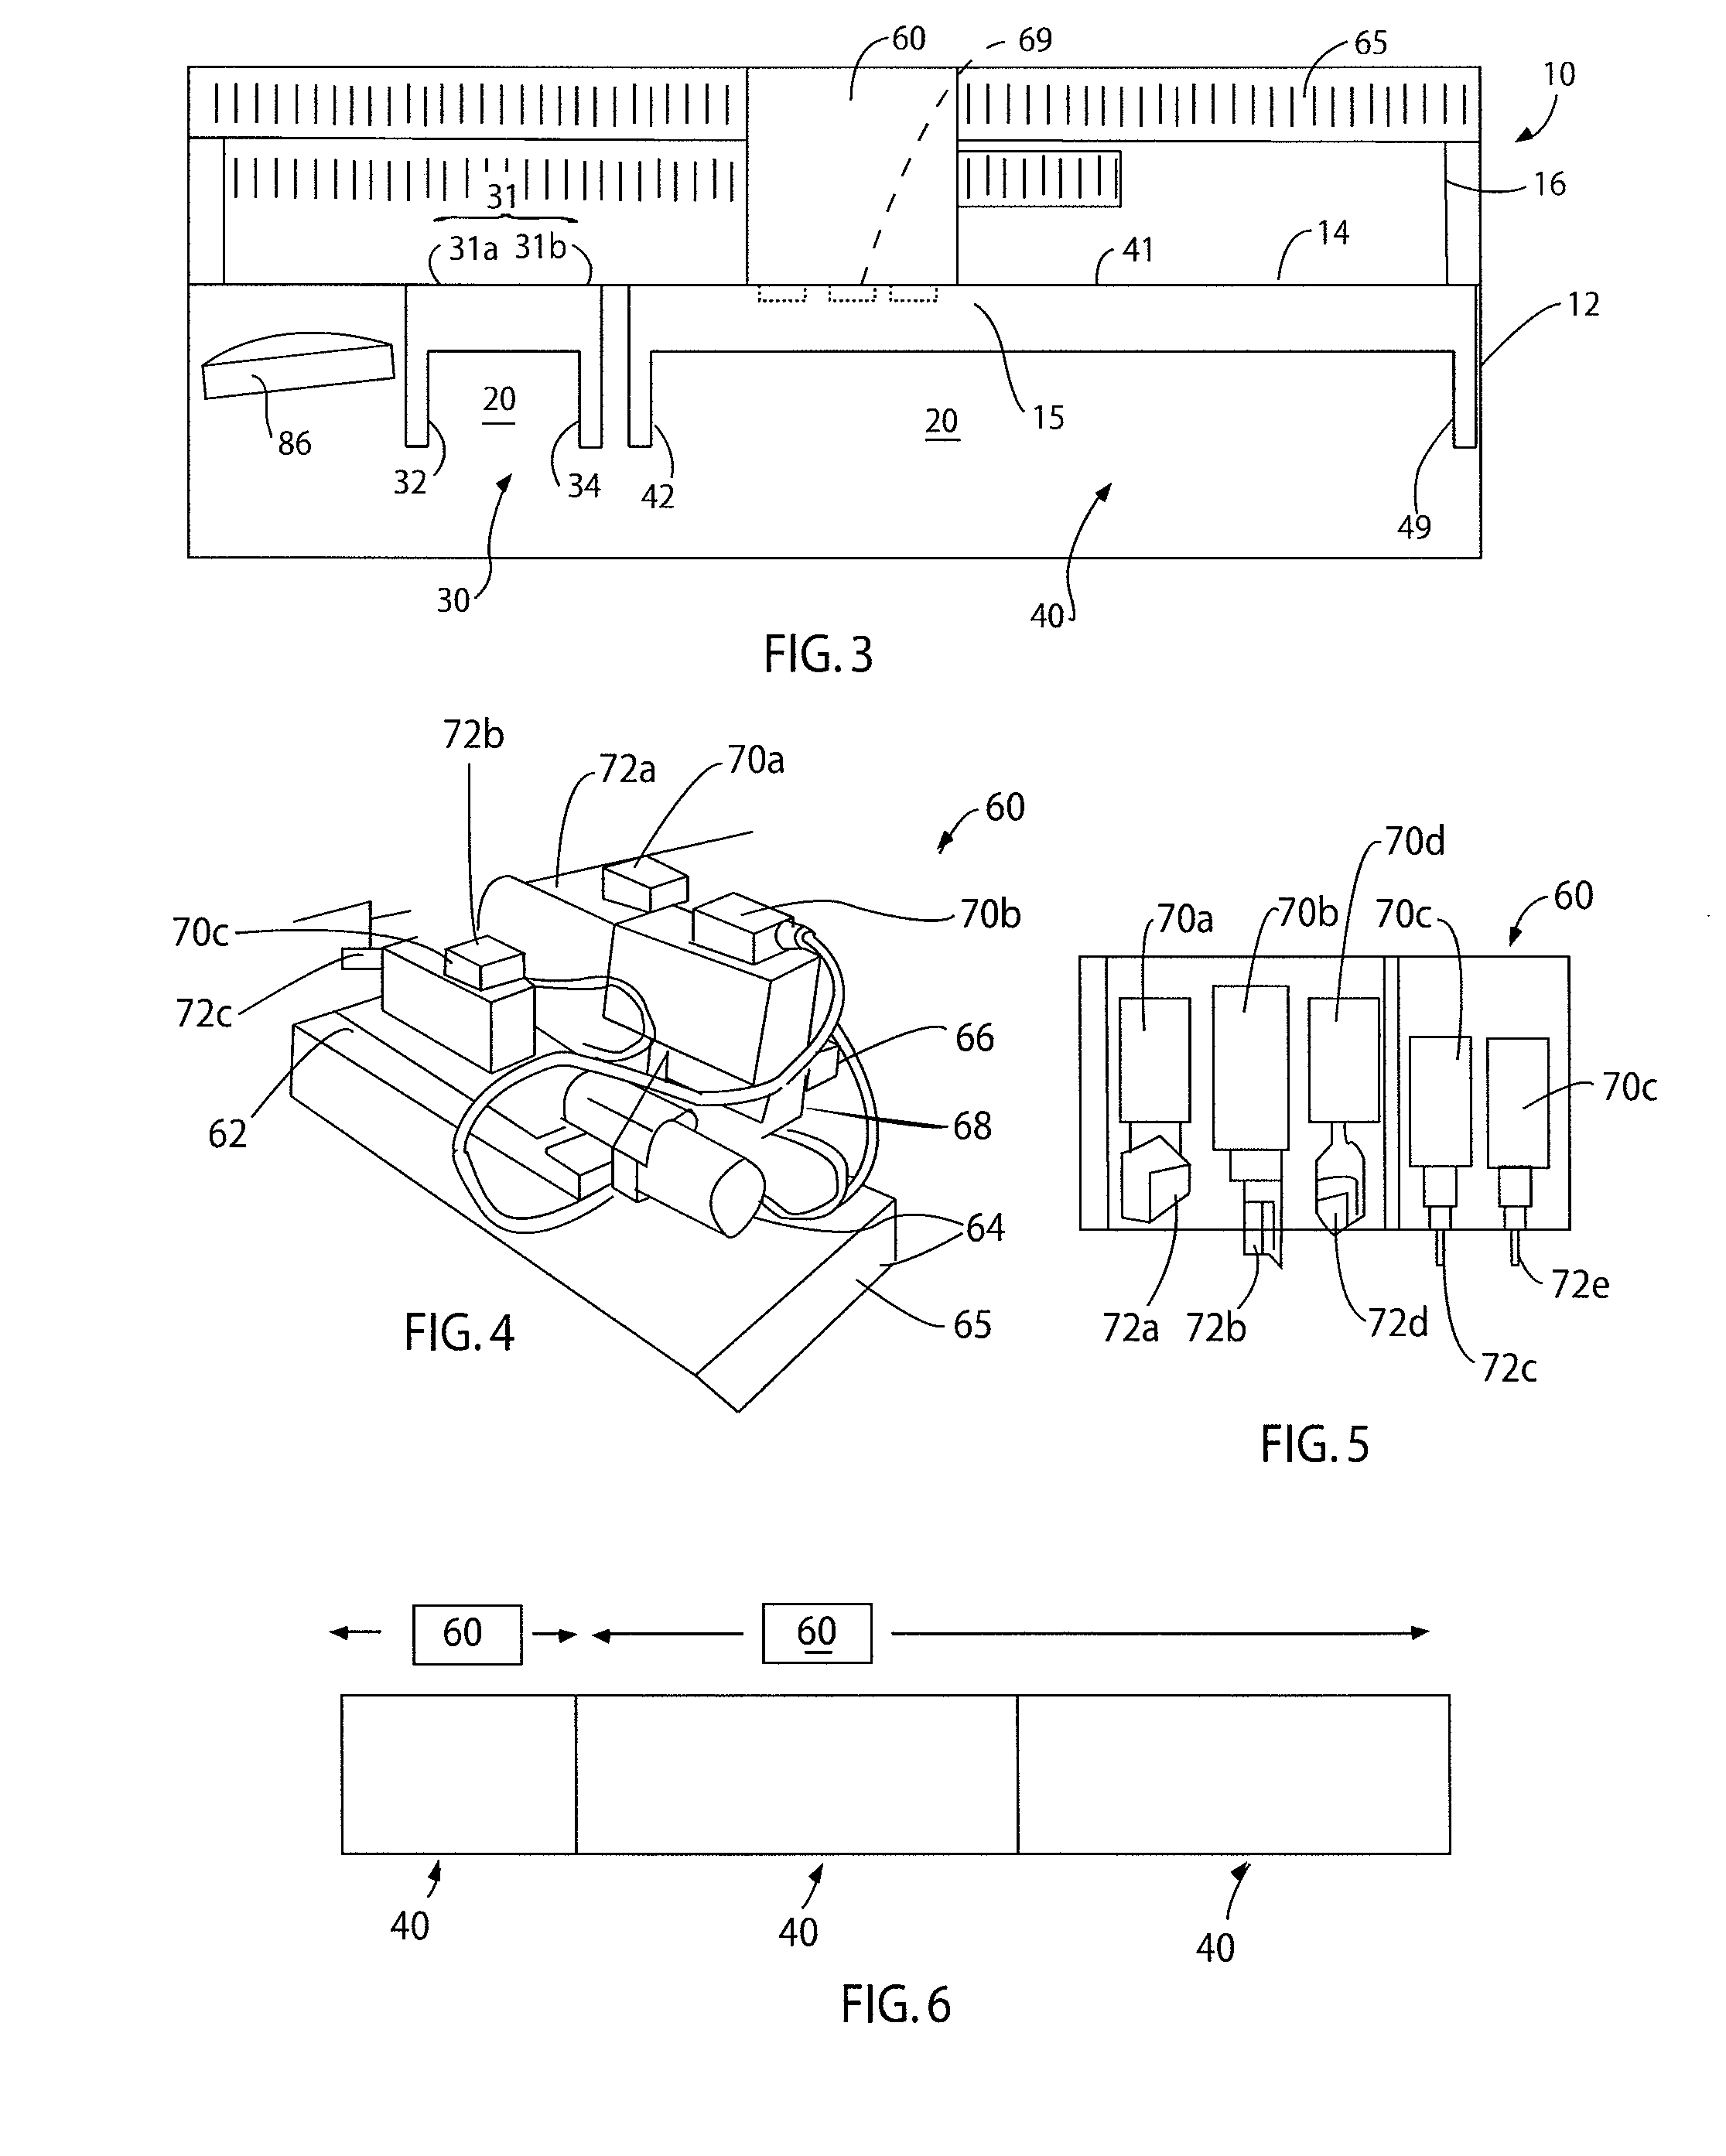 Apparatus and methods for shaping and machining elongate workpieces